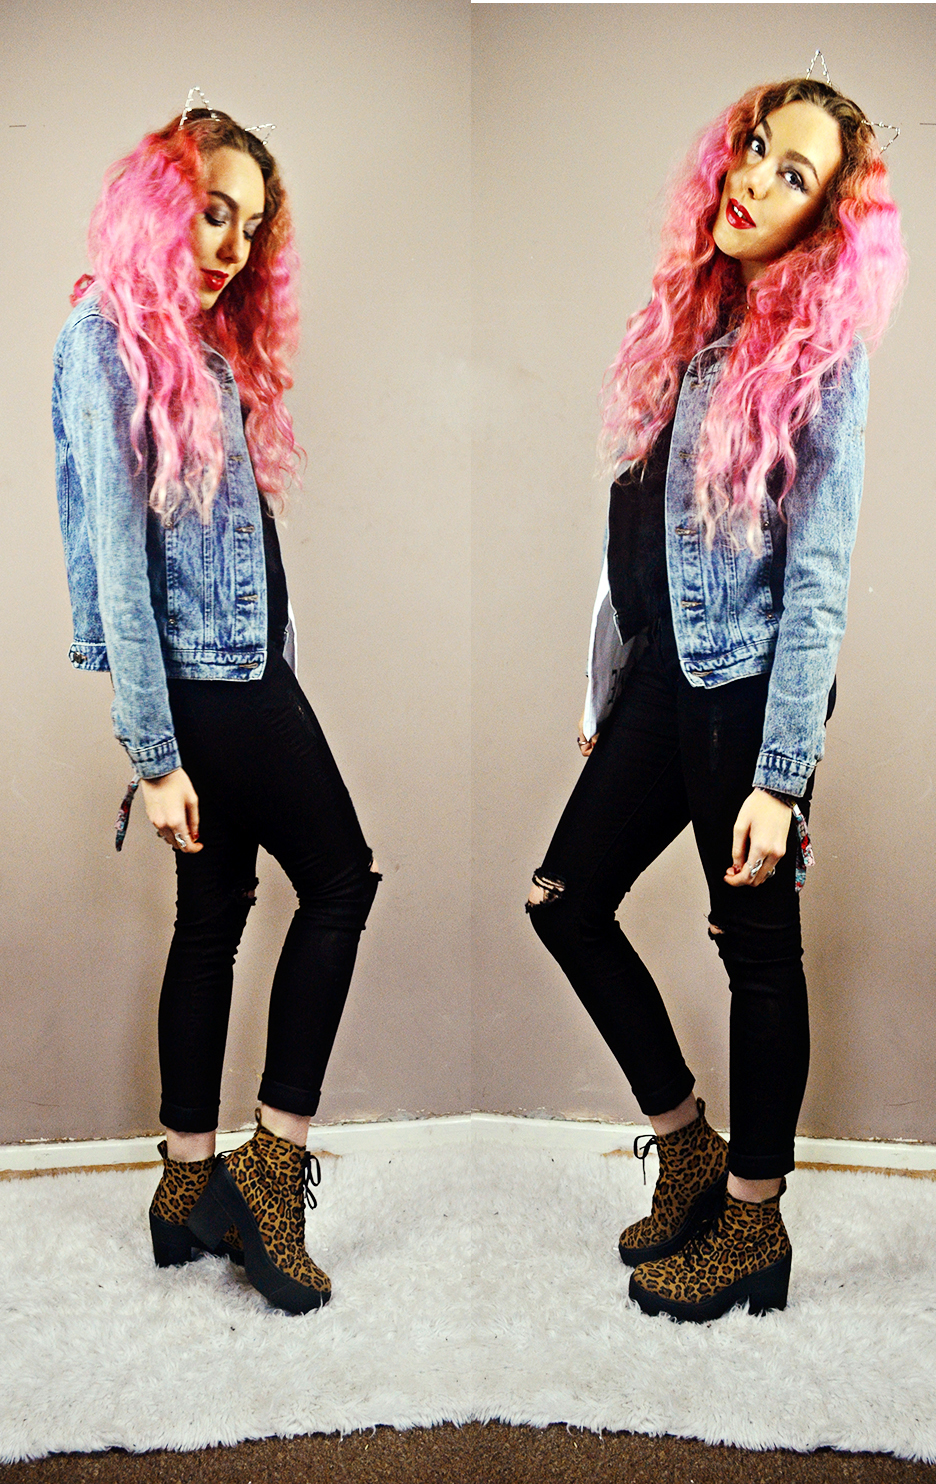 Stephi LaReine// UK Fashion & Lifestyle Blogger with pink hair, rock on ruby kitten ears, asos leopard boots, lilac moon necklaces, quiz ripped jeans, fluffy knit top, boohoo denim jacket, fbloggers, bbloggers, lbloggers